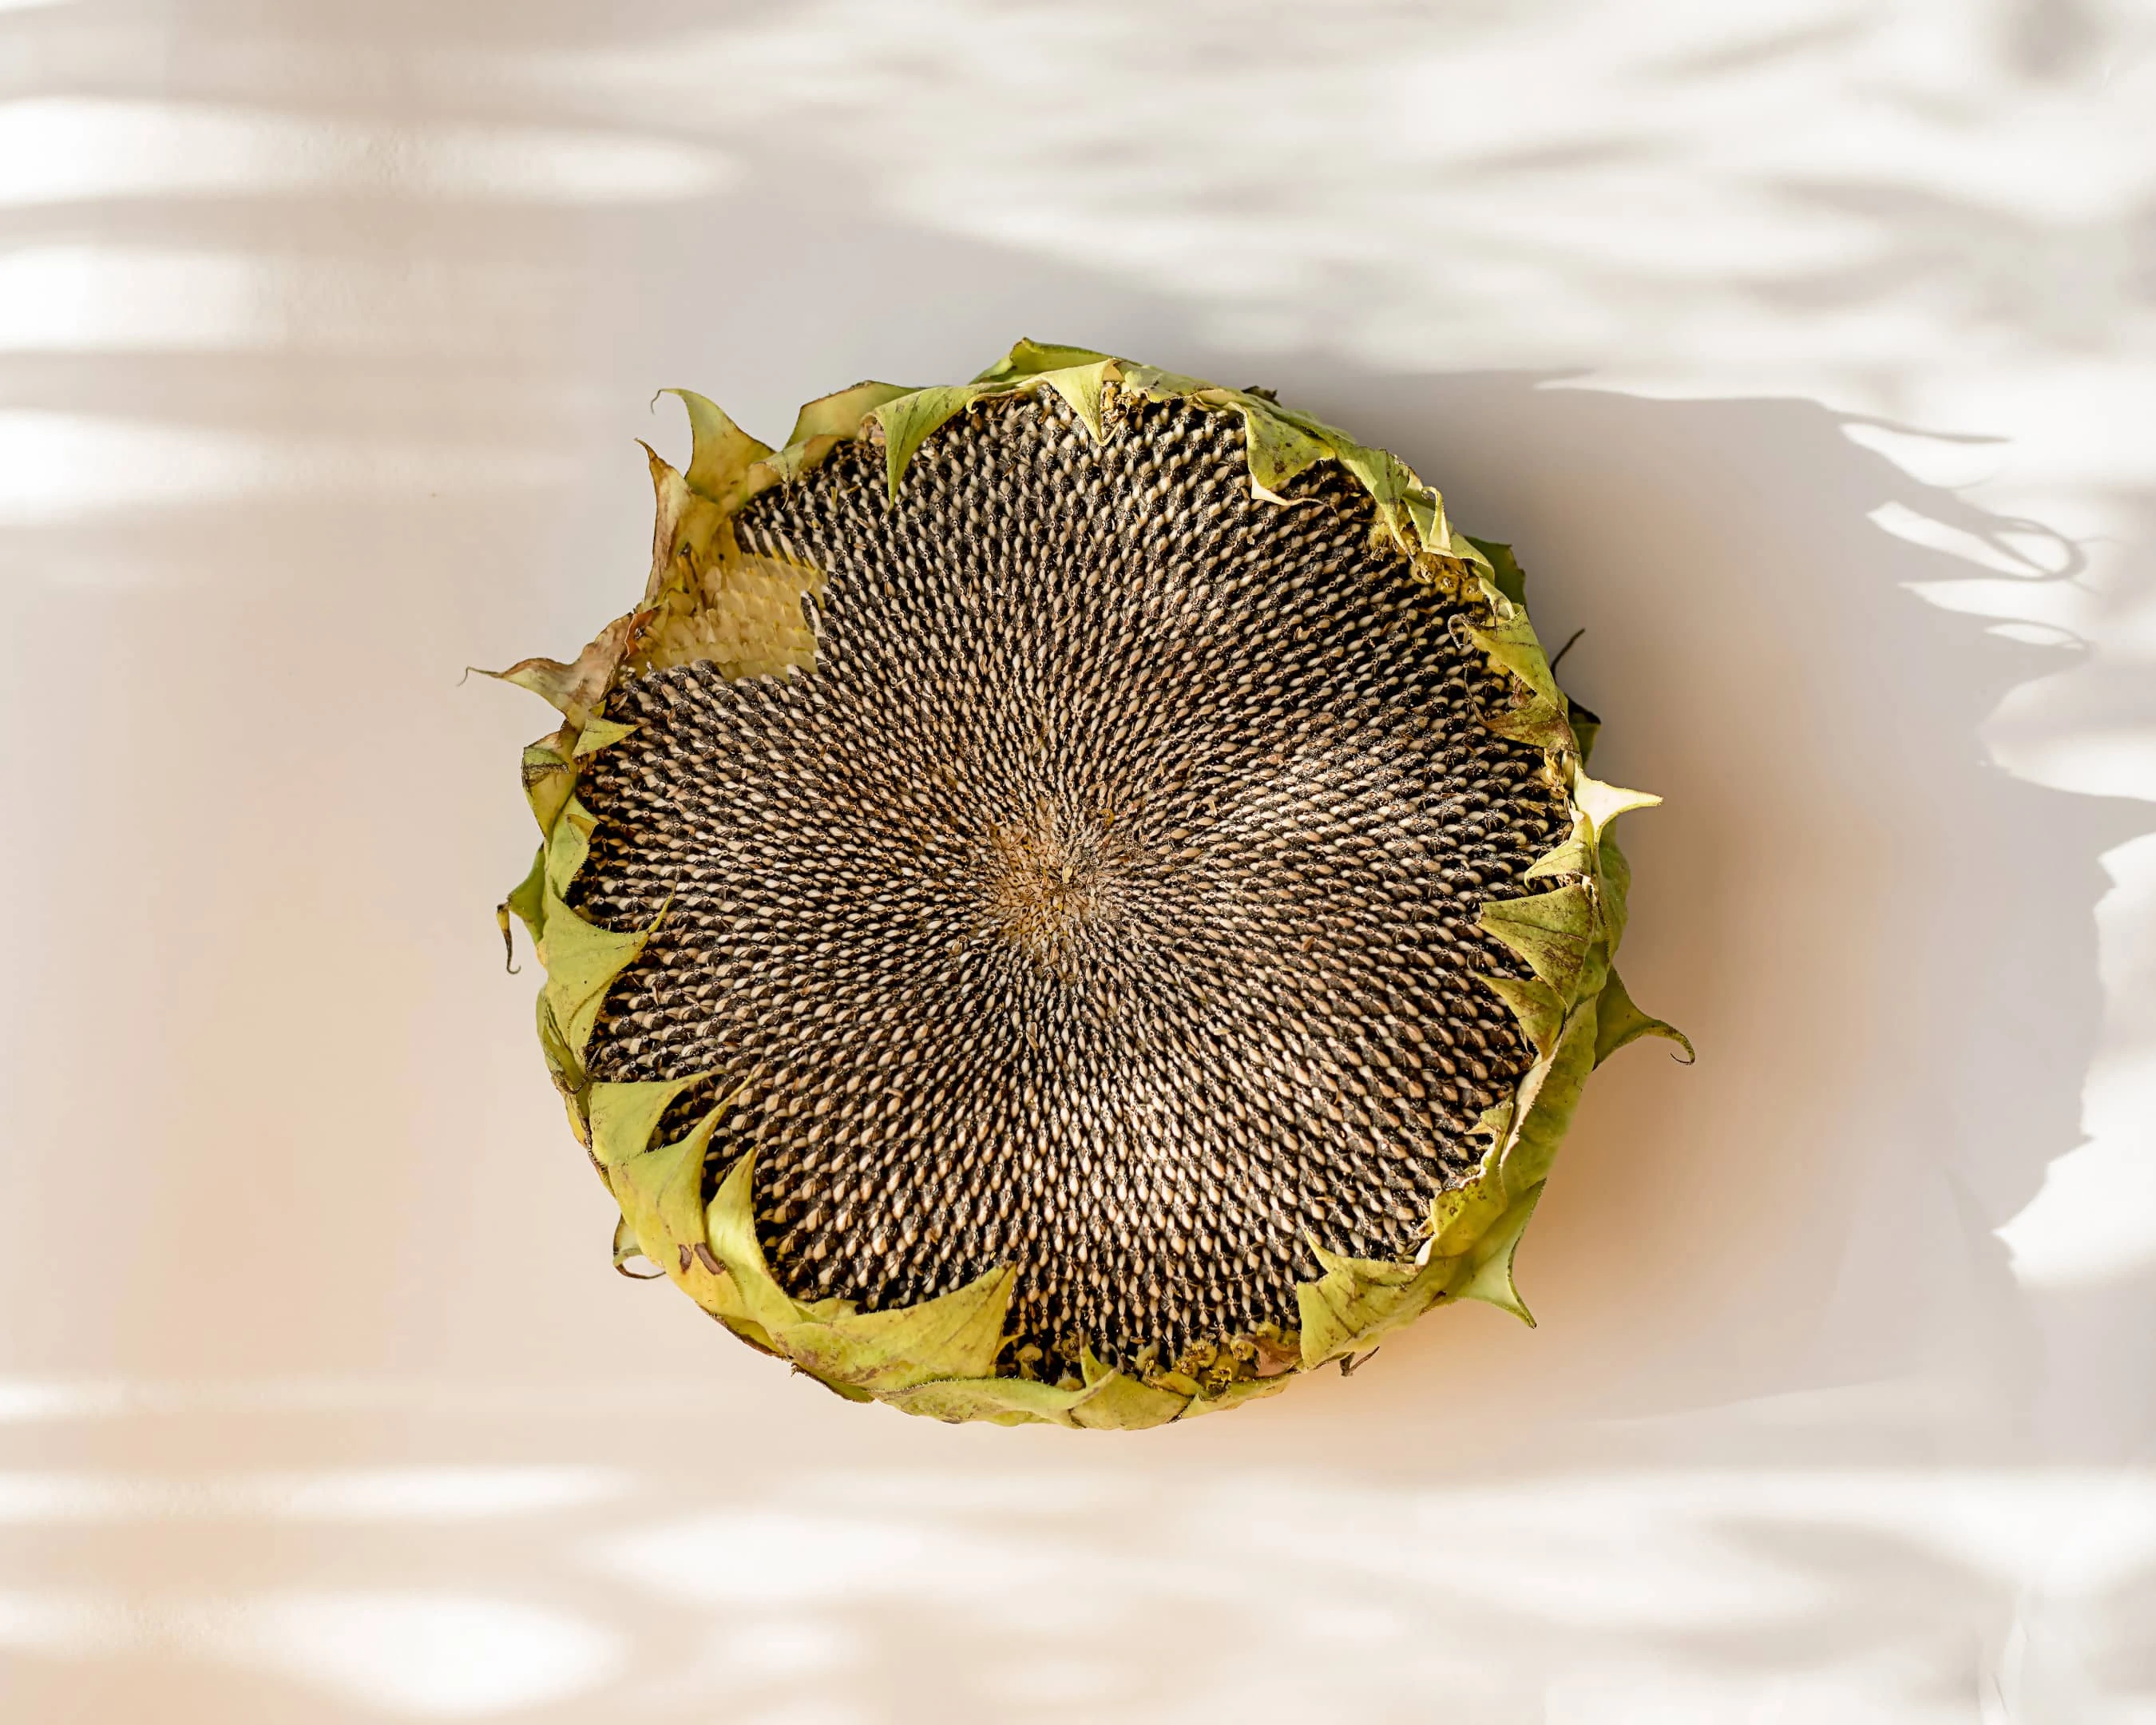 Mature sunflower with seeds on gray table